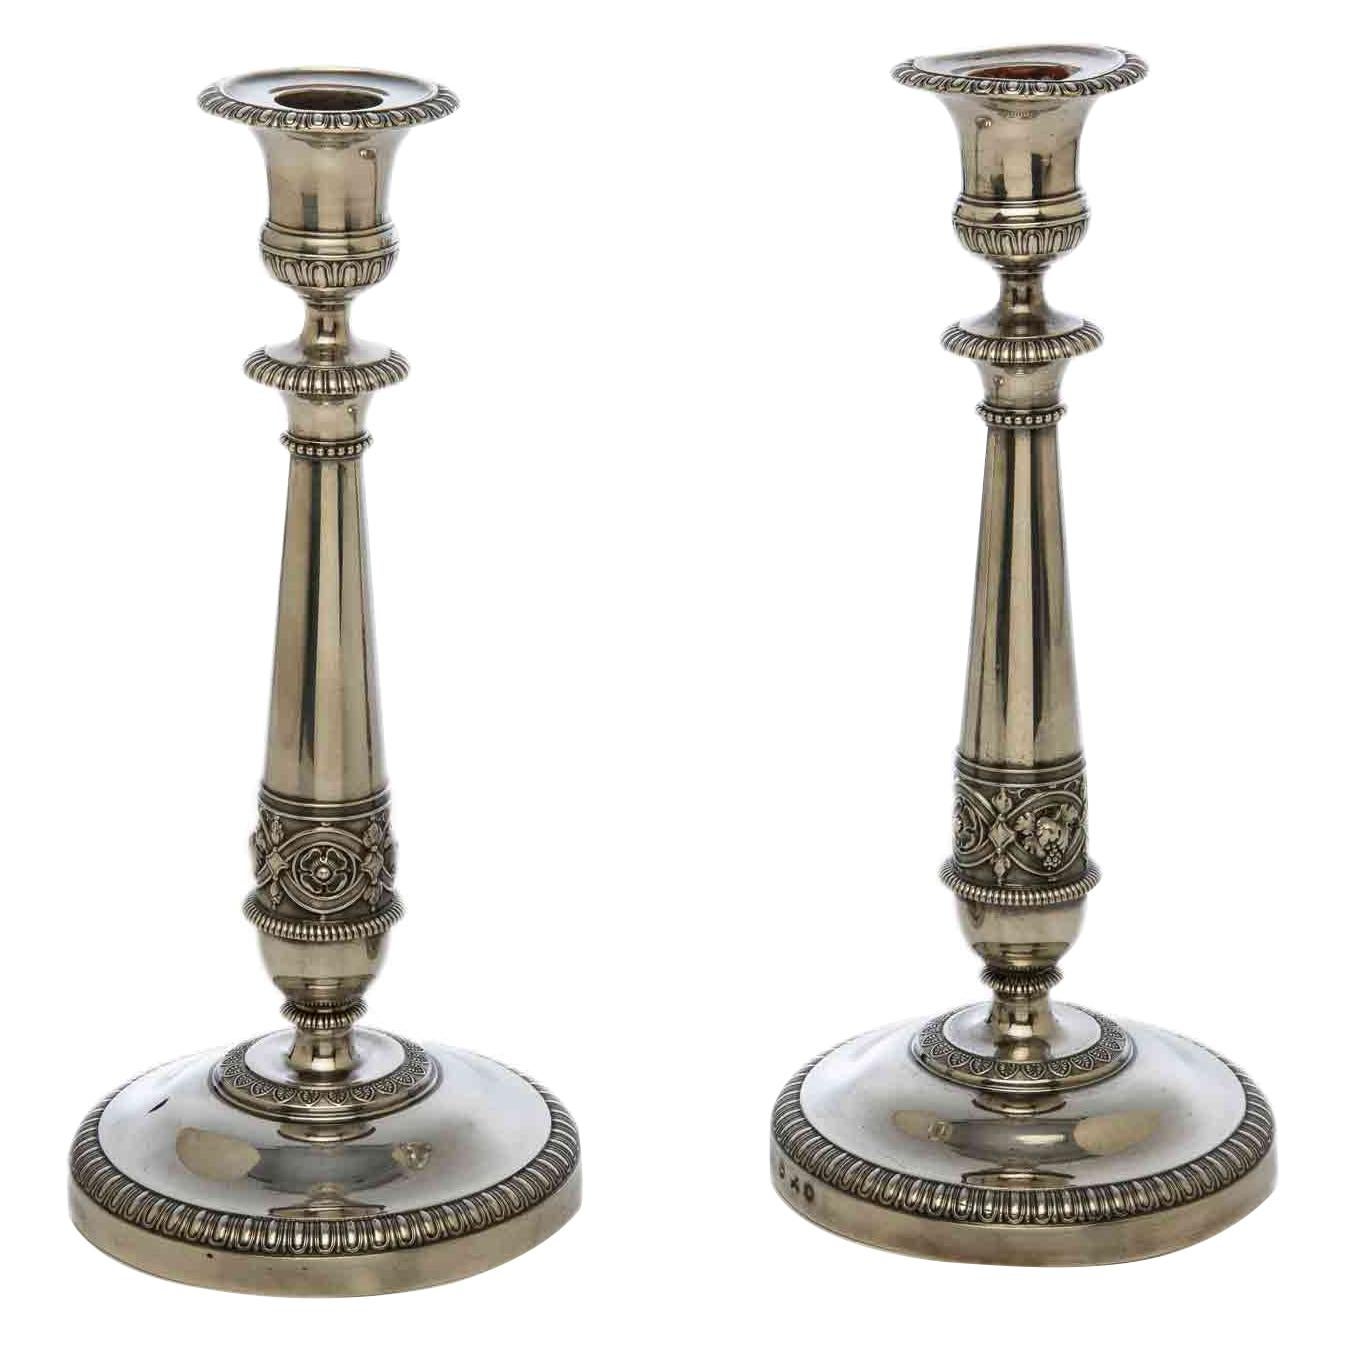 Pair of Neoclassical Silver Circular Candlesticks from Milan 19th Century 1820